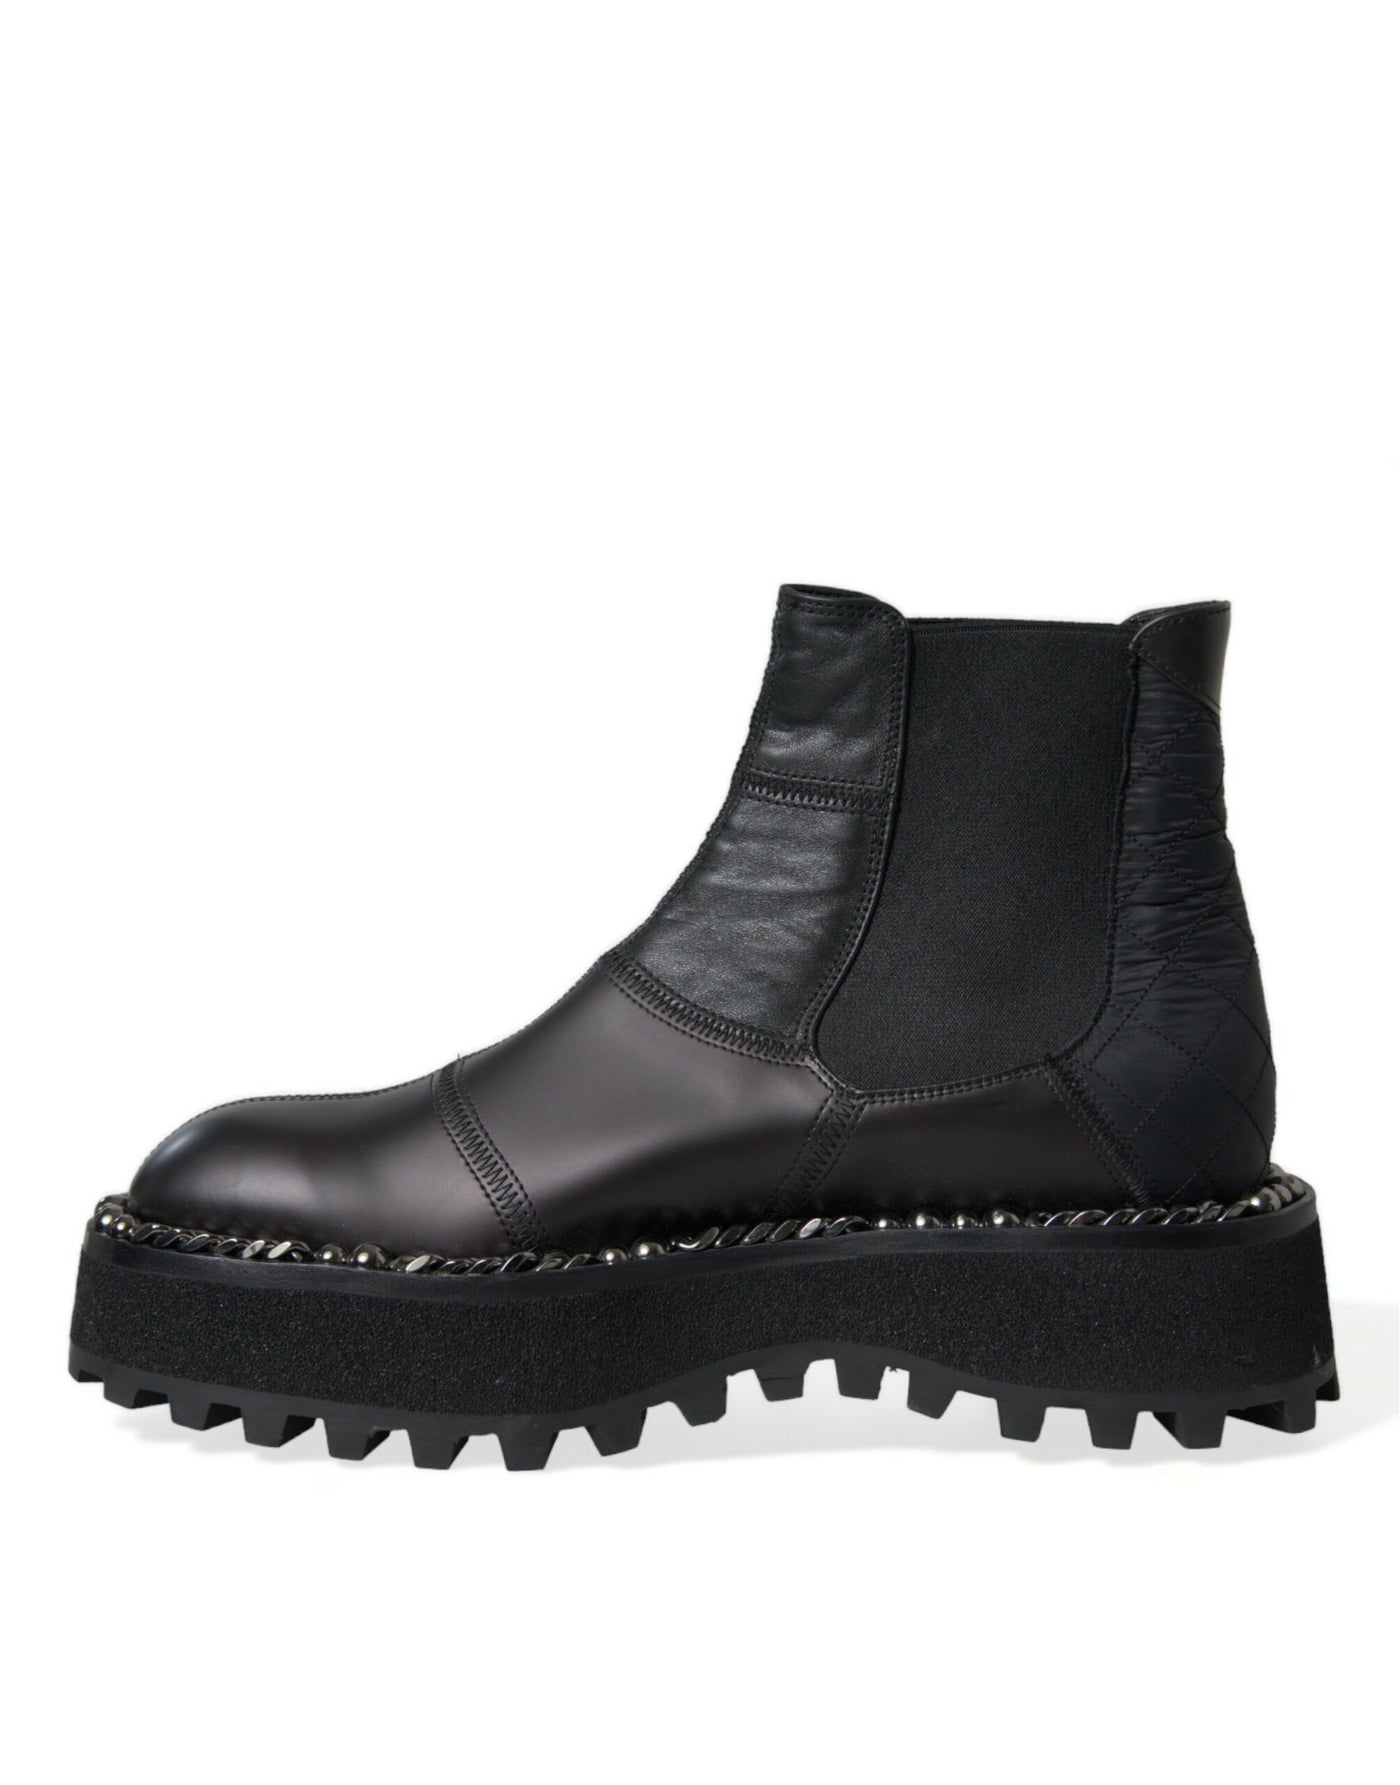 Dolce & Gabbana Black Leather Slip On Stretch Chelsea Boots Shoes